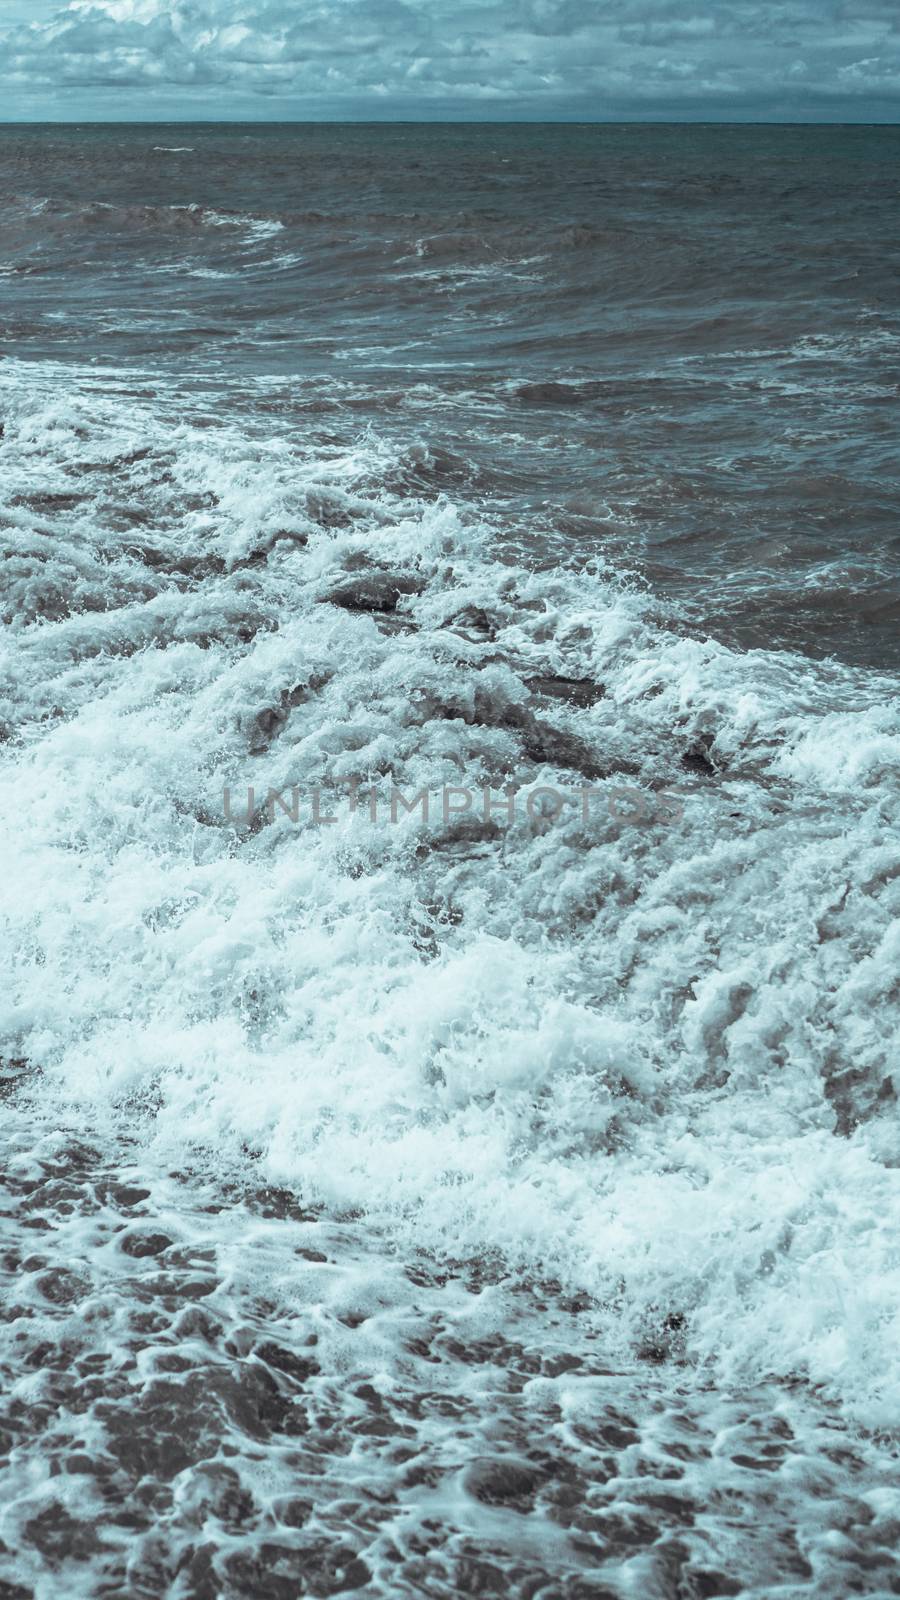 A breaking wave and stormy sea in a vertical panorama format.